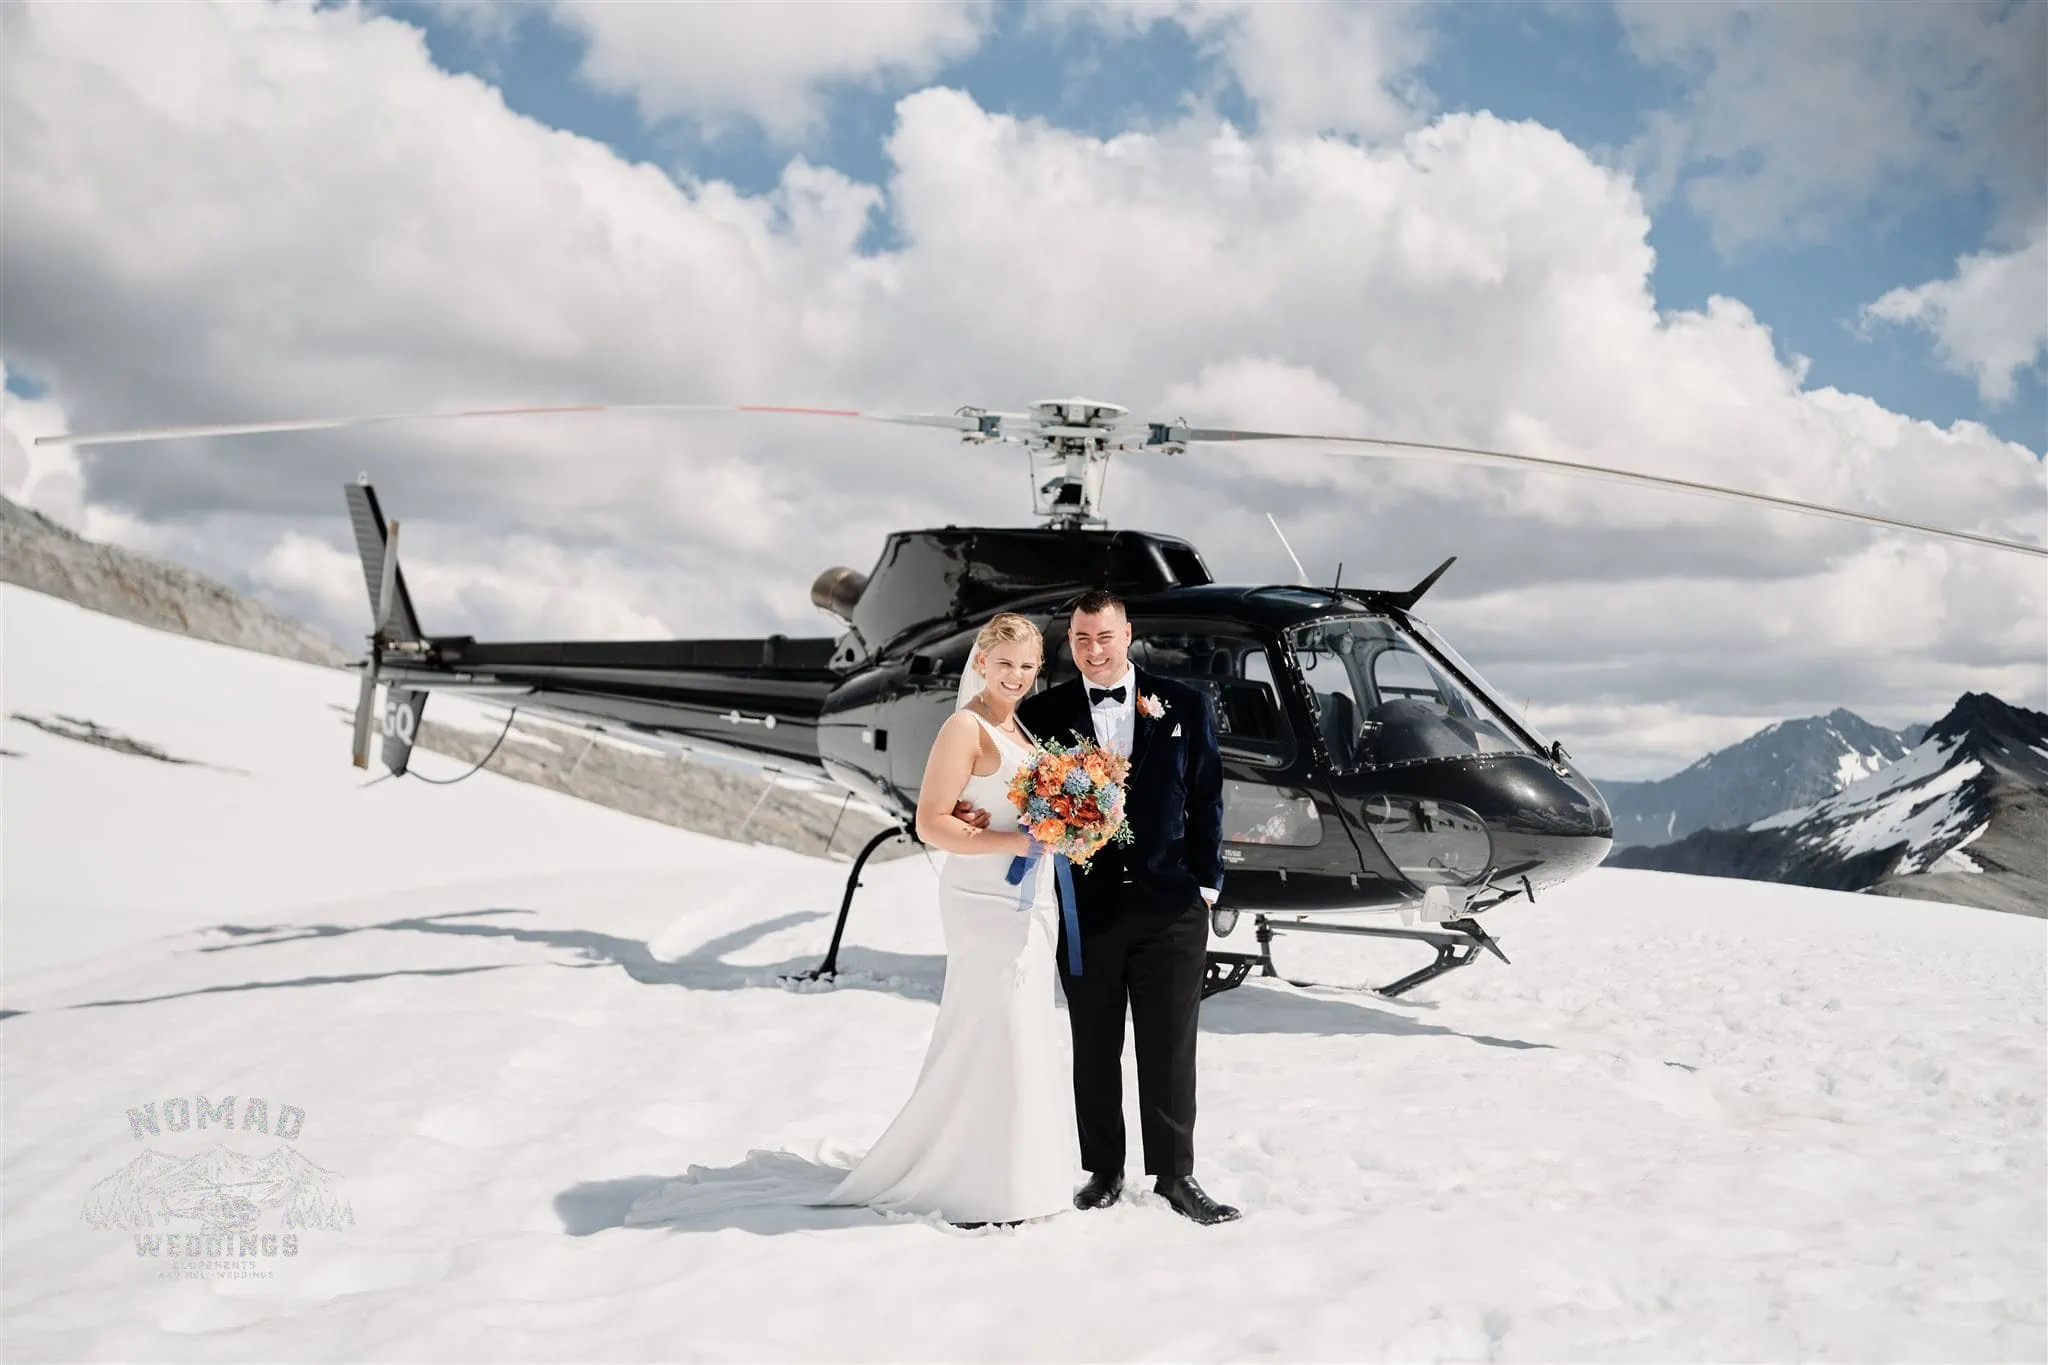 Queenstown New Zealand Elopement Wedding Photographer - A bride and groom standing in front of a helicopter during the Summer Edition - Heli photoshoot in Queenstown, NZ.